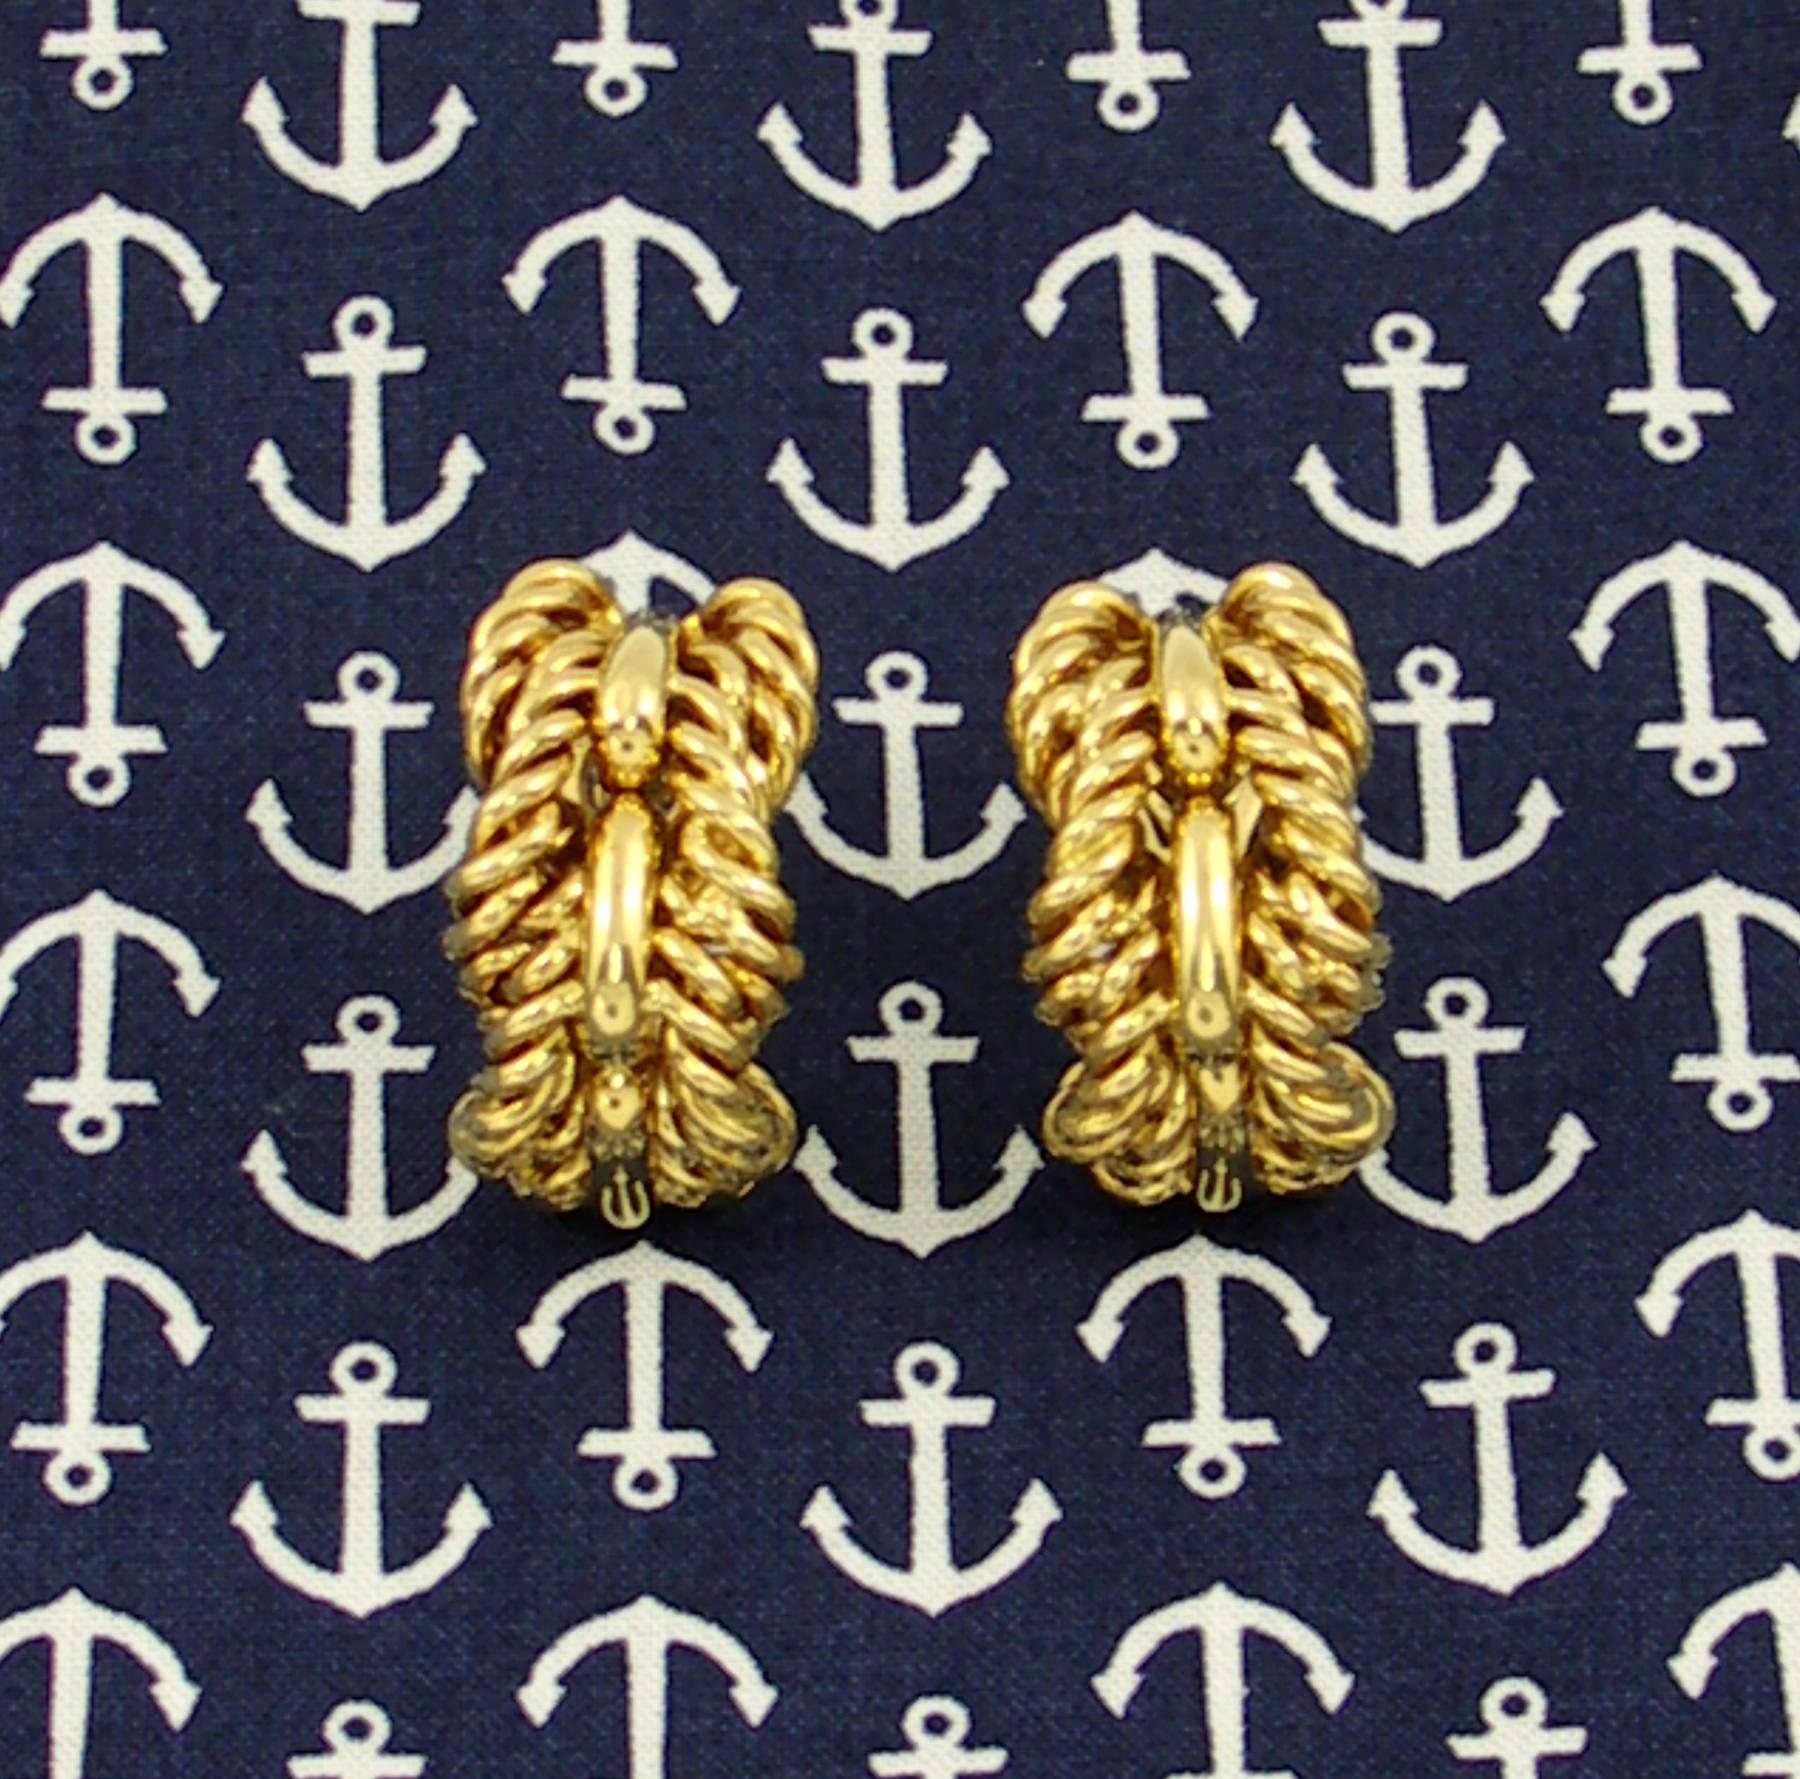 A pair of 18K yellow gold earrings measuring 5/8 of an inch wide, and 1 1/4 inches long, centered on high polished ingots atop a braided design. Signed Tiffany & Co.